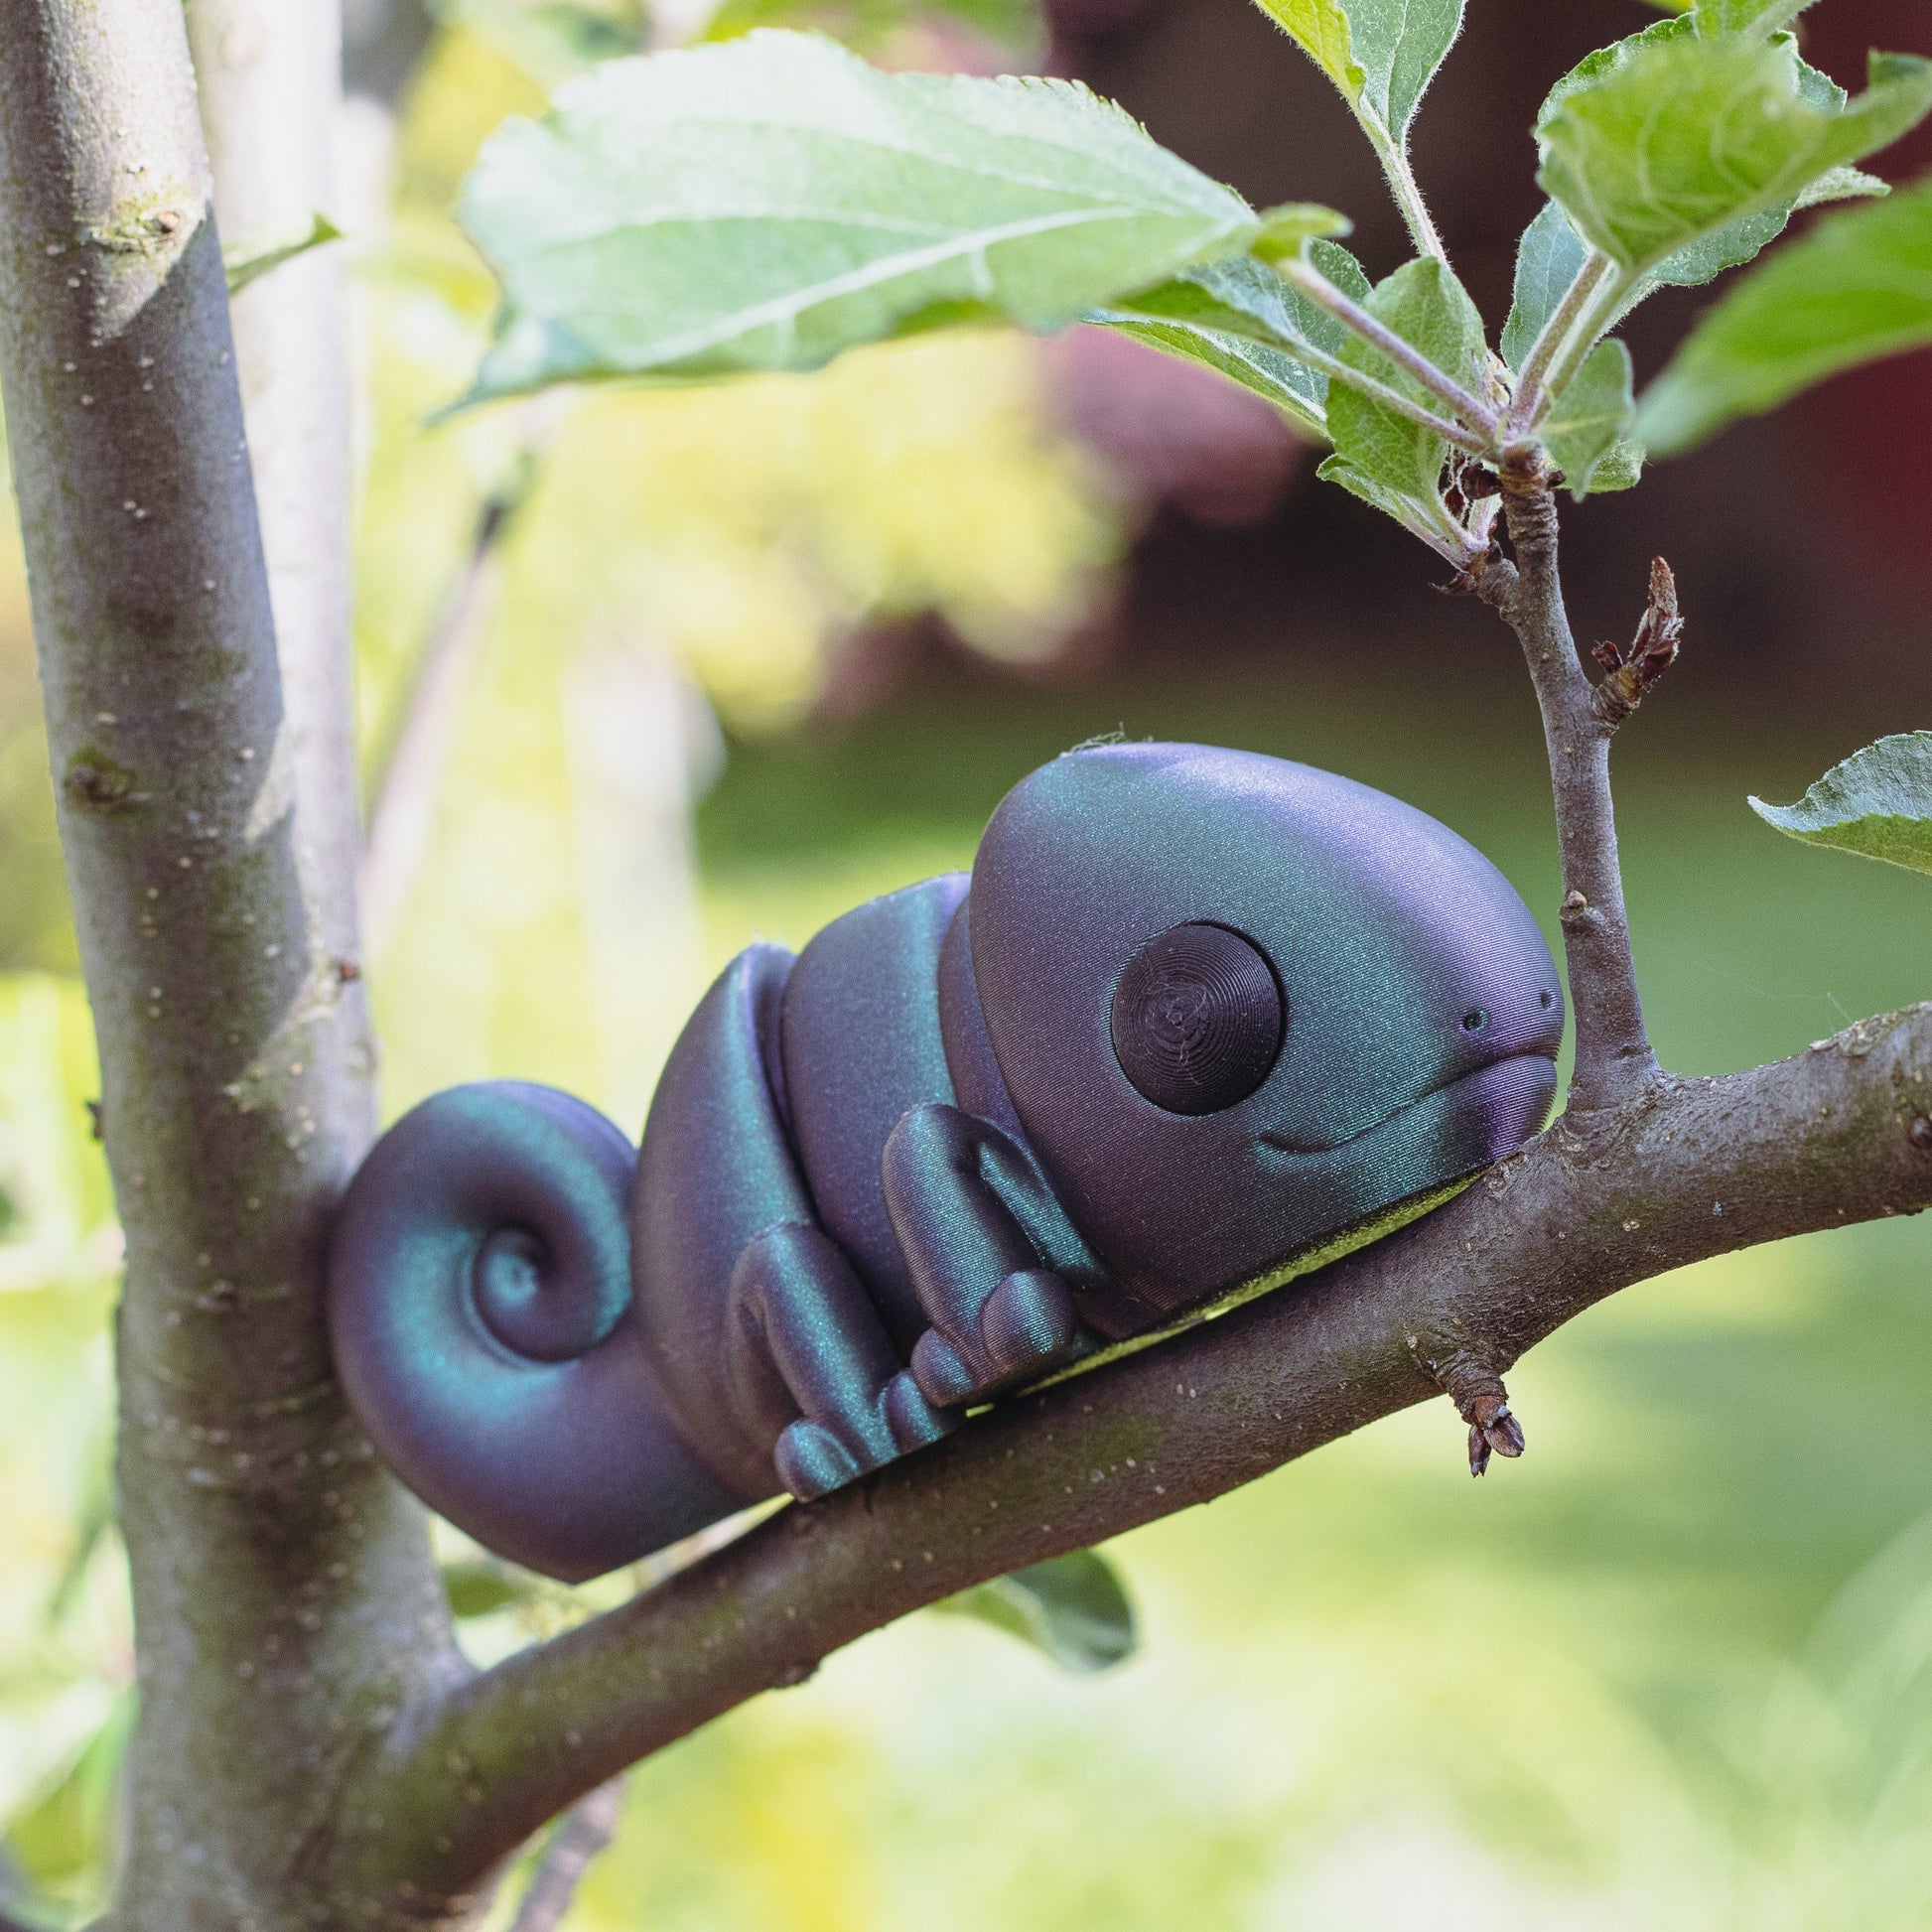 3D Printed Carl the Chameleon - Articulating, Flexi Toy